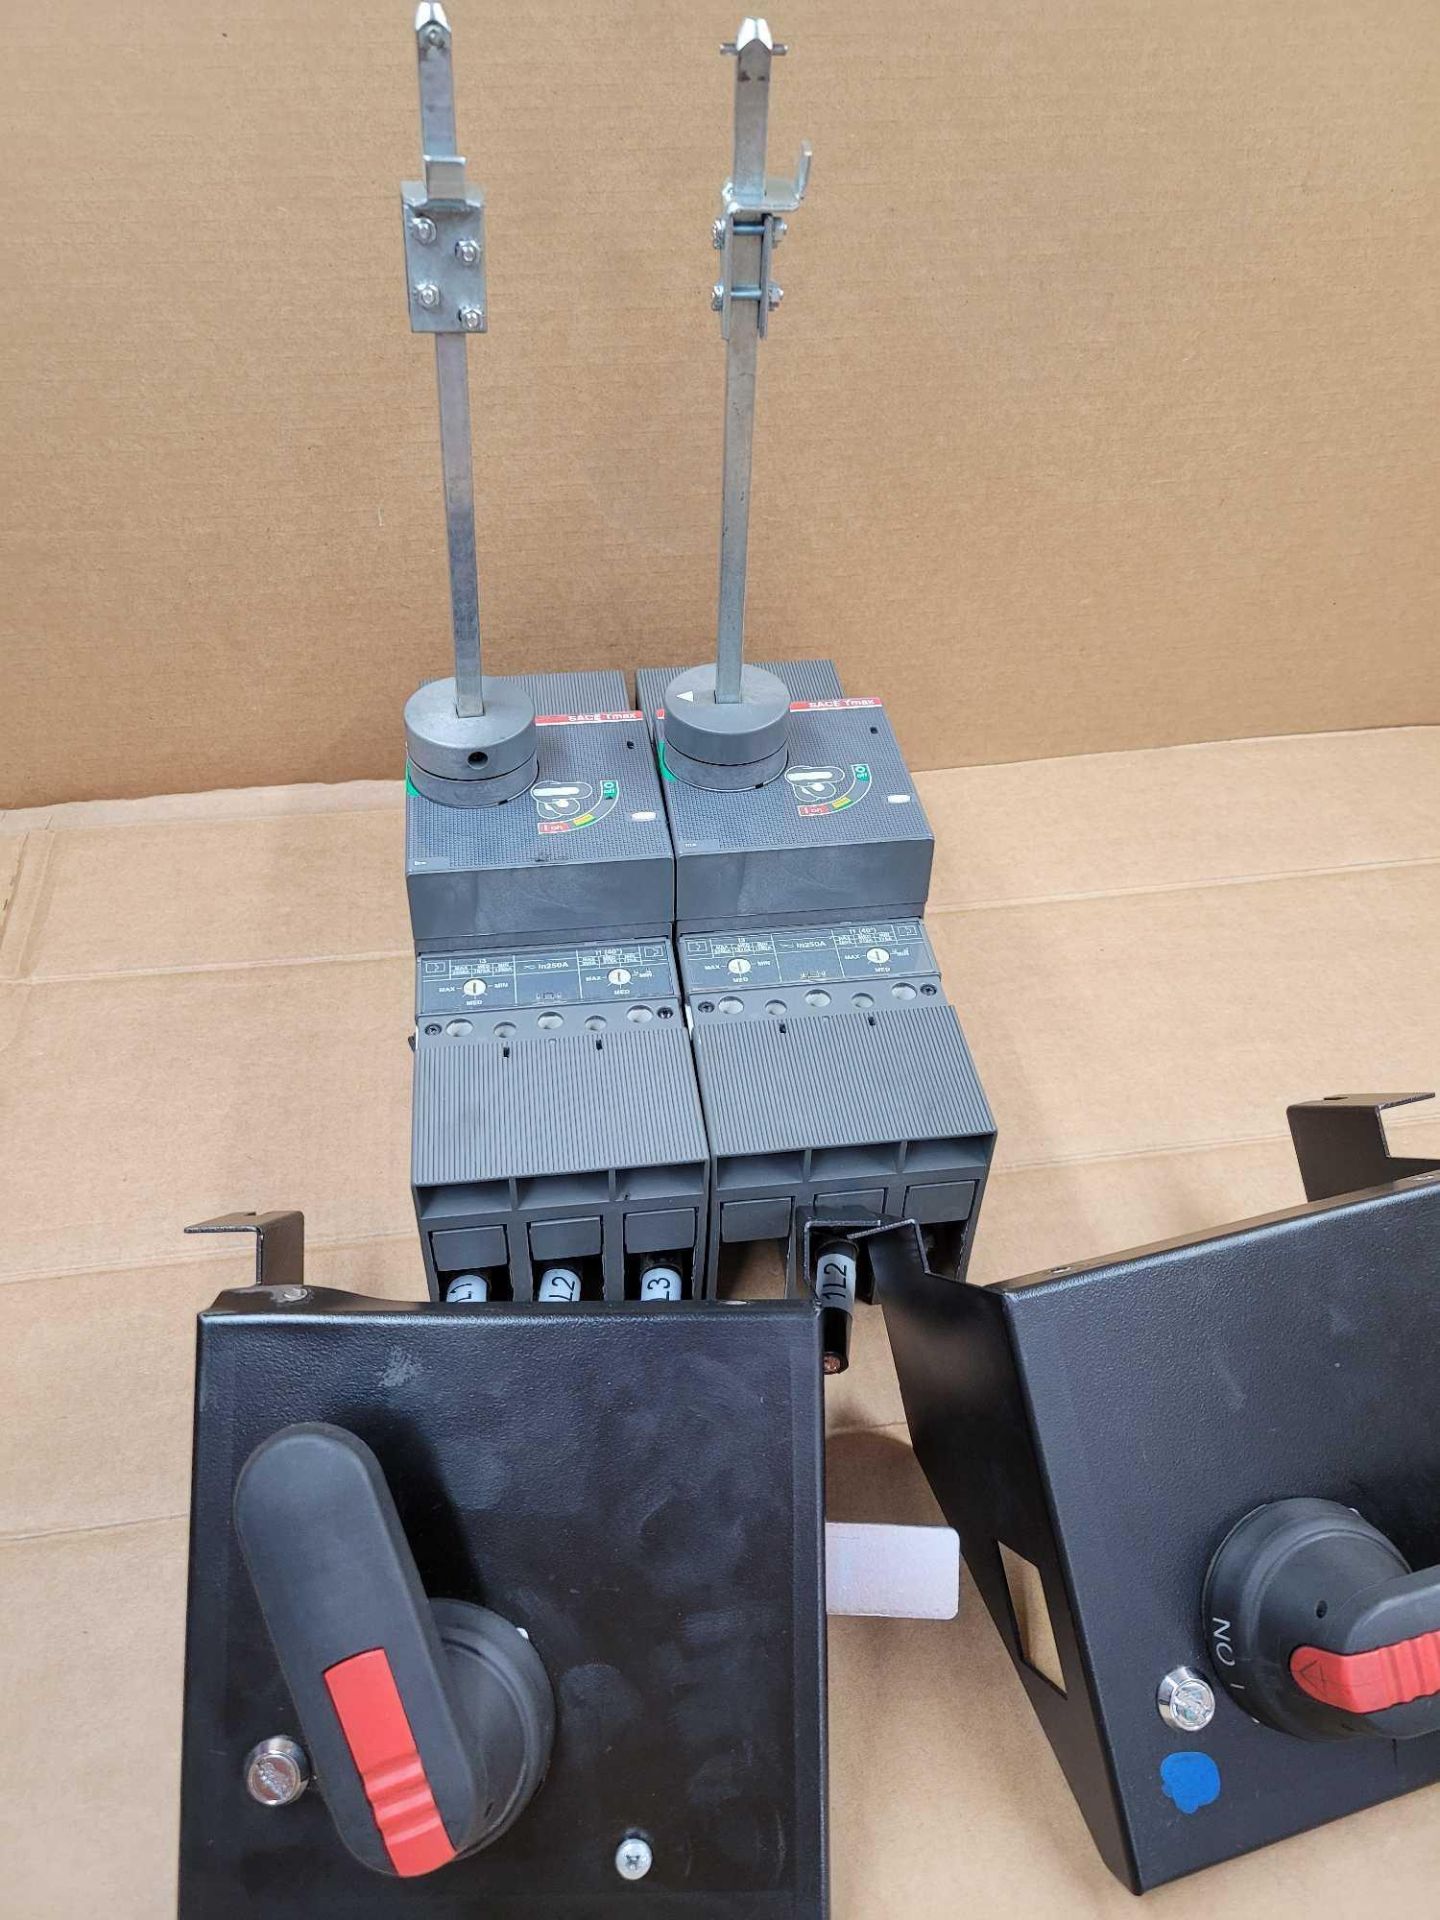 LOT OF 2 ABB T4L250 / Sace Tmax 250 Amp Circuit Breaker with Circuit Breaker Accesory and Handle Att